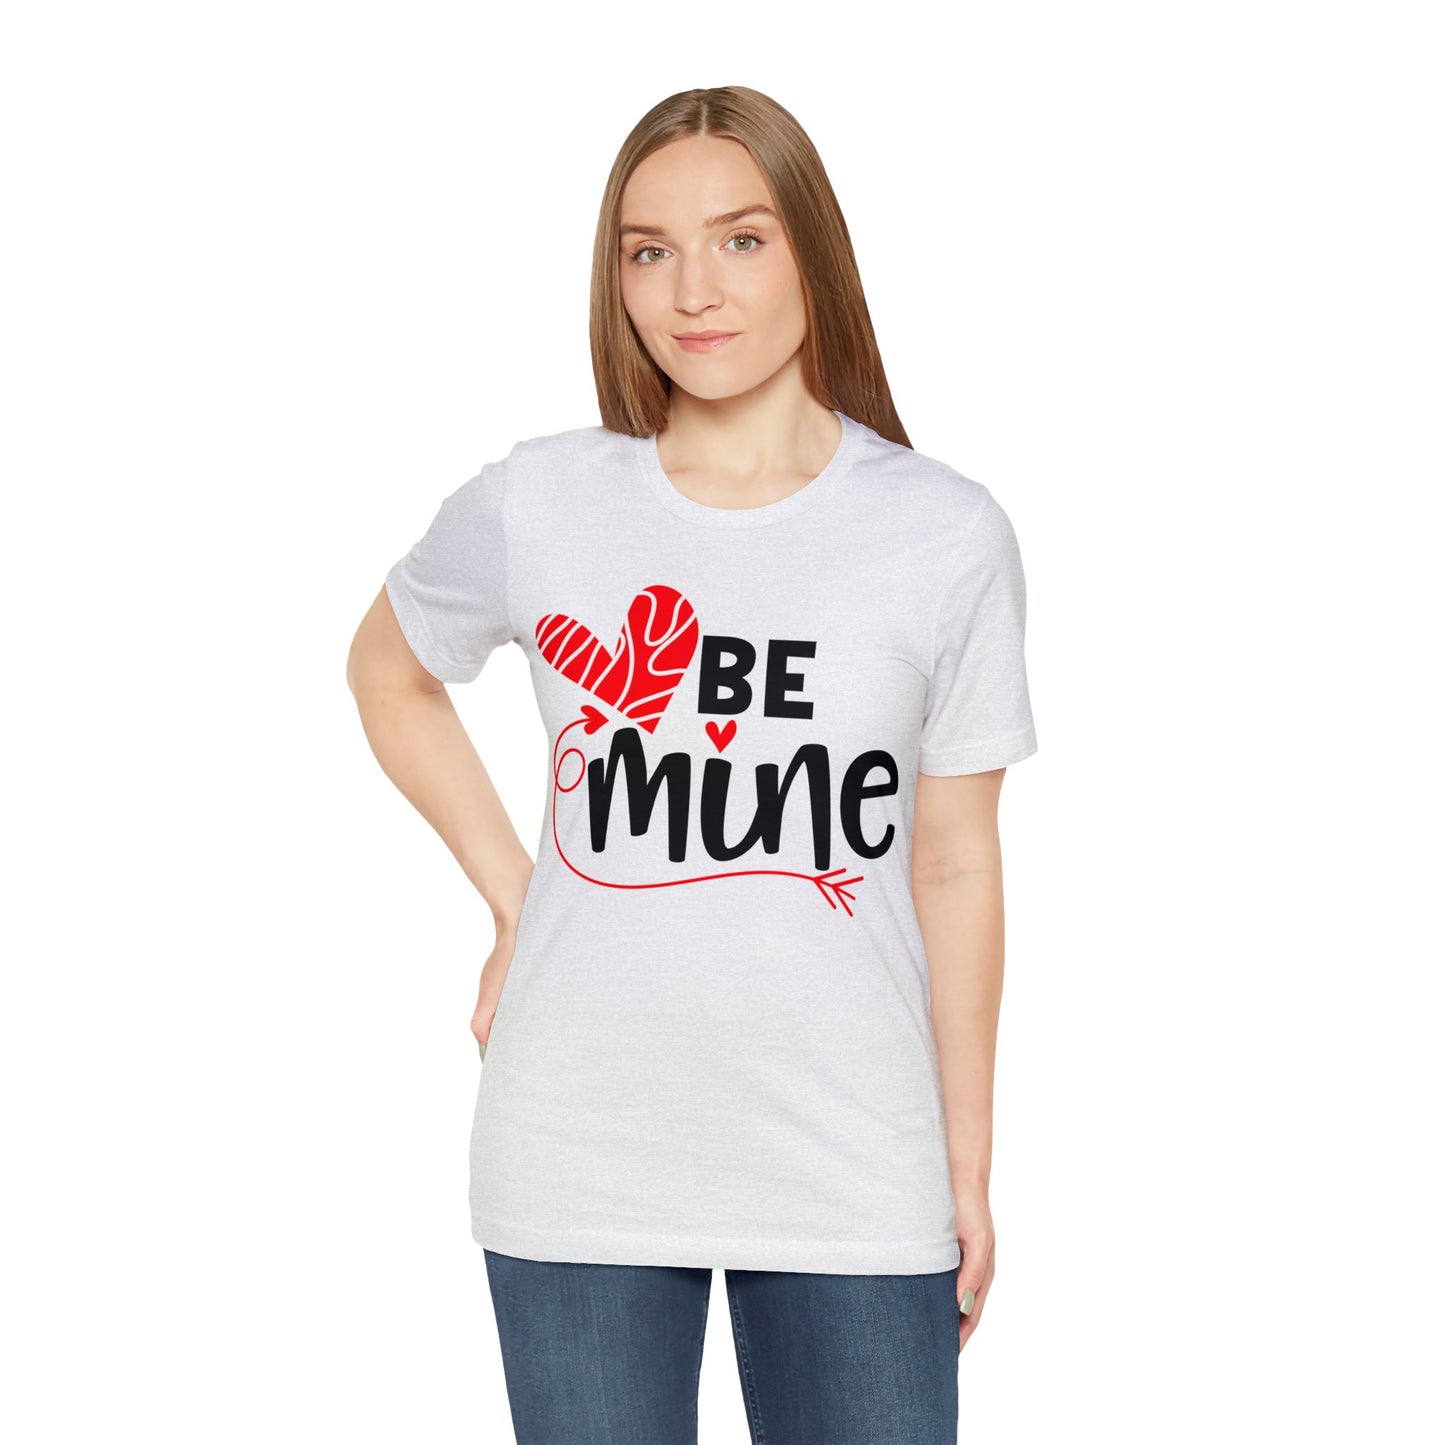 Be Mine - Valentine's Day Shirts - Express Your Love in Trendy Fashion!